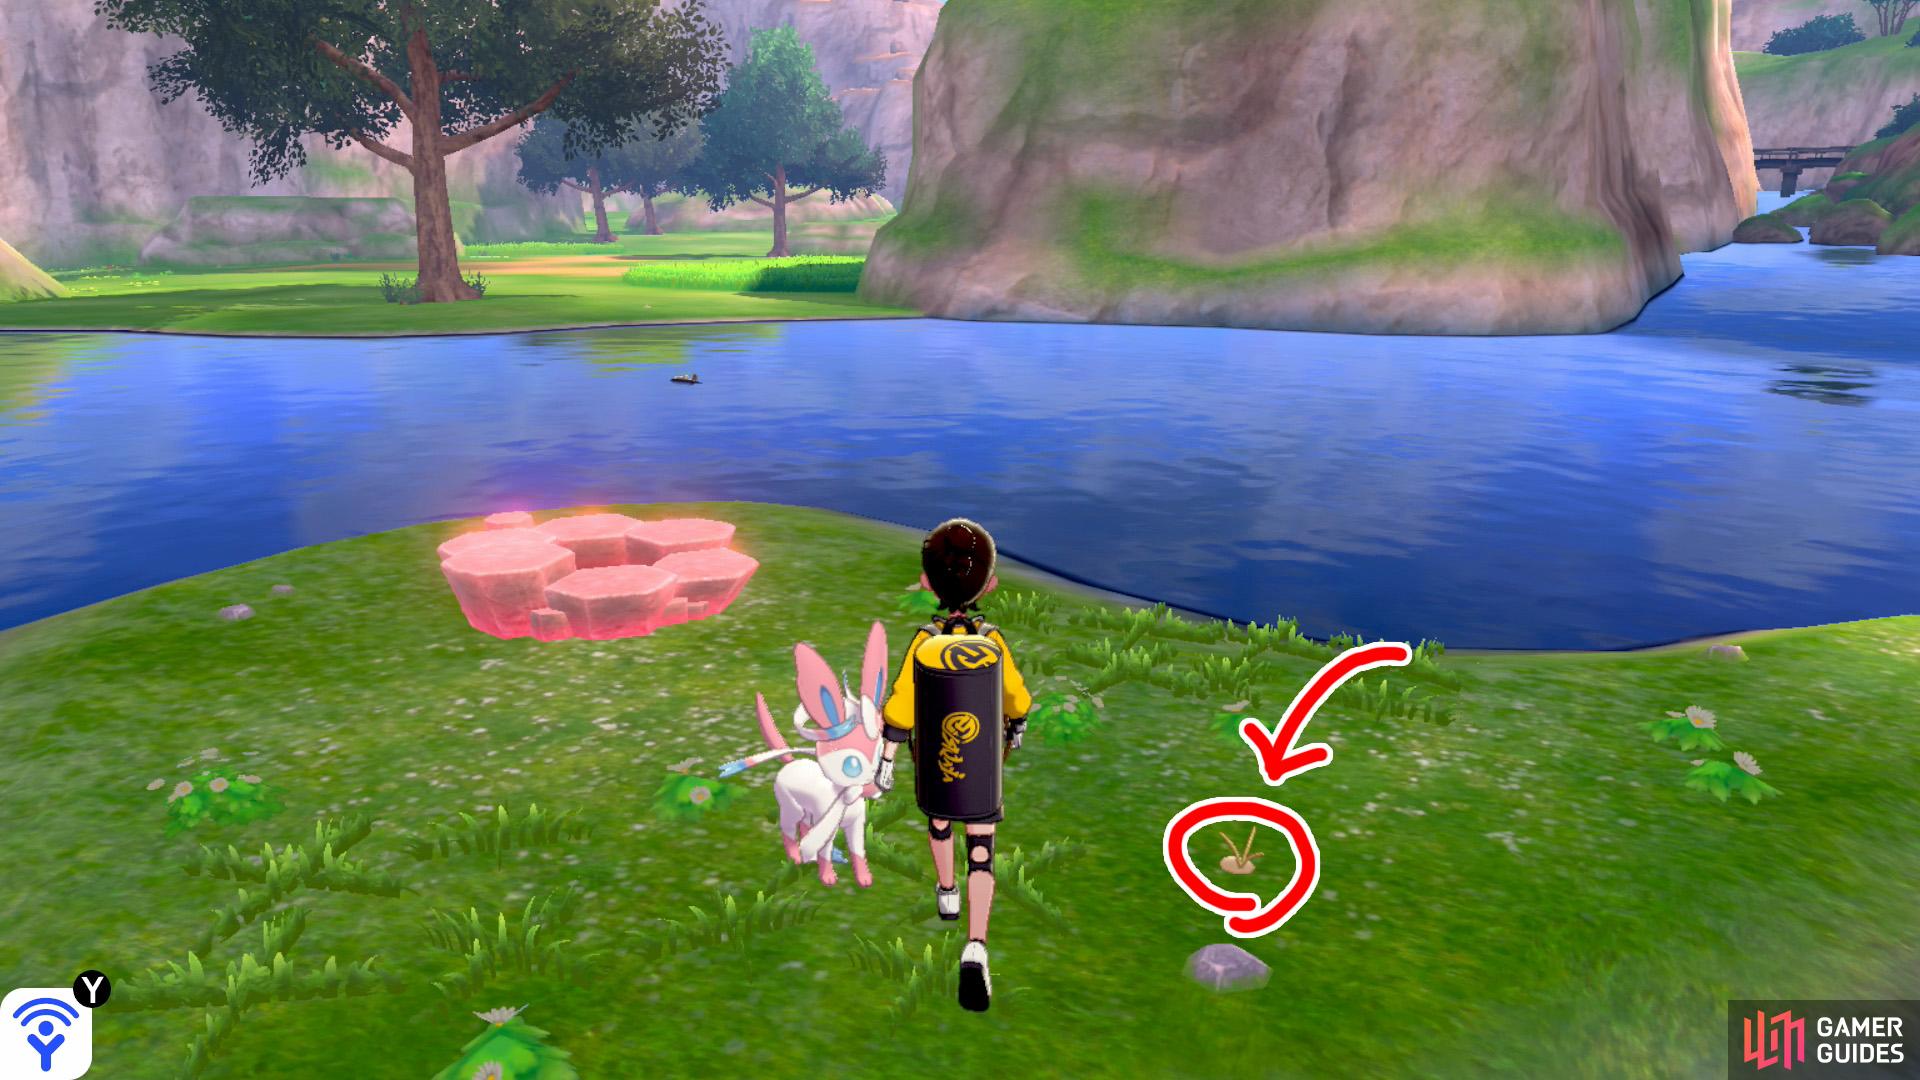 5/15: From Diglett 5, head into the lake and swim towards the island in the middle (with the Pokémon Den). It's next to a pebble, facing away from the rest of the lowlands.